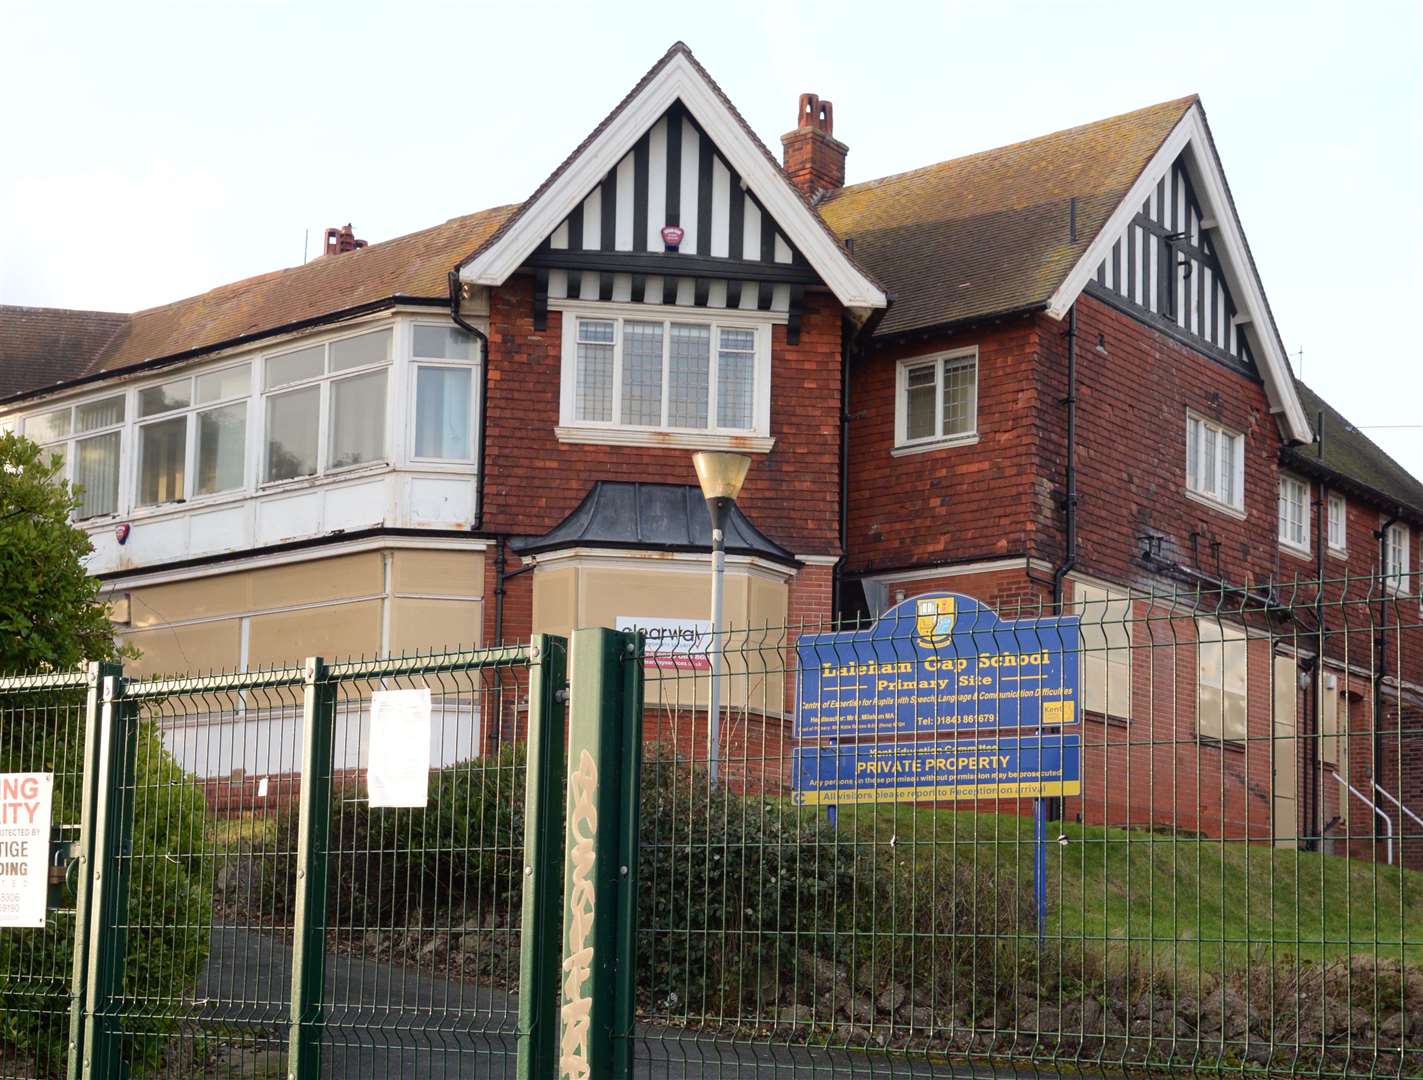 The former Laleham Gap School in South Cliff Parade, between Broadstairs and Ramsgate